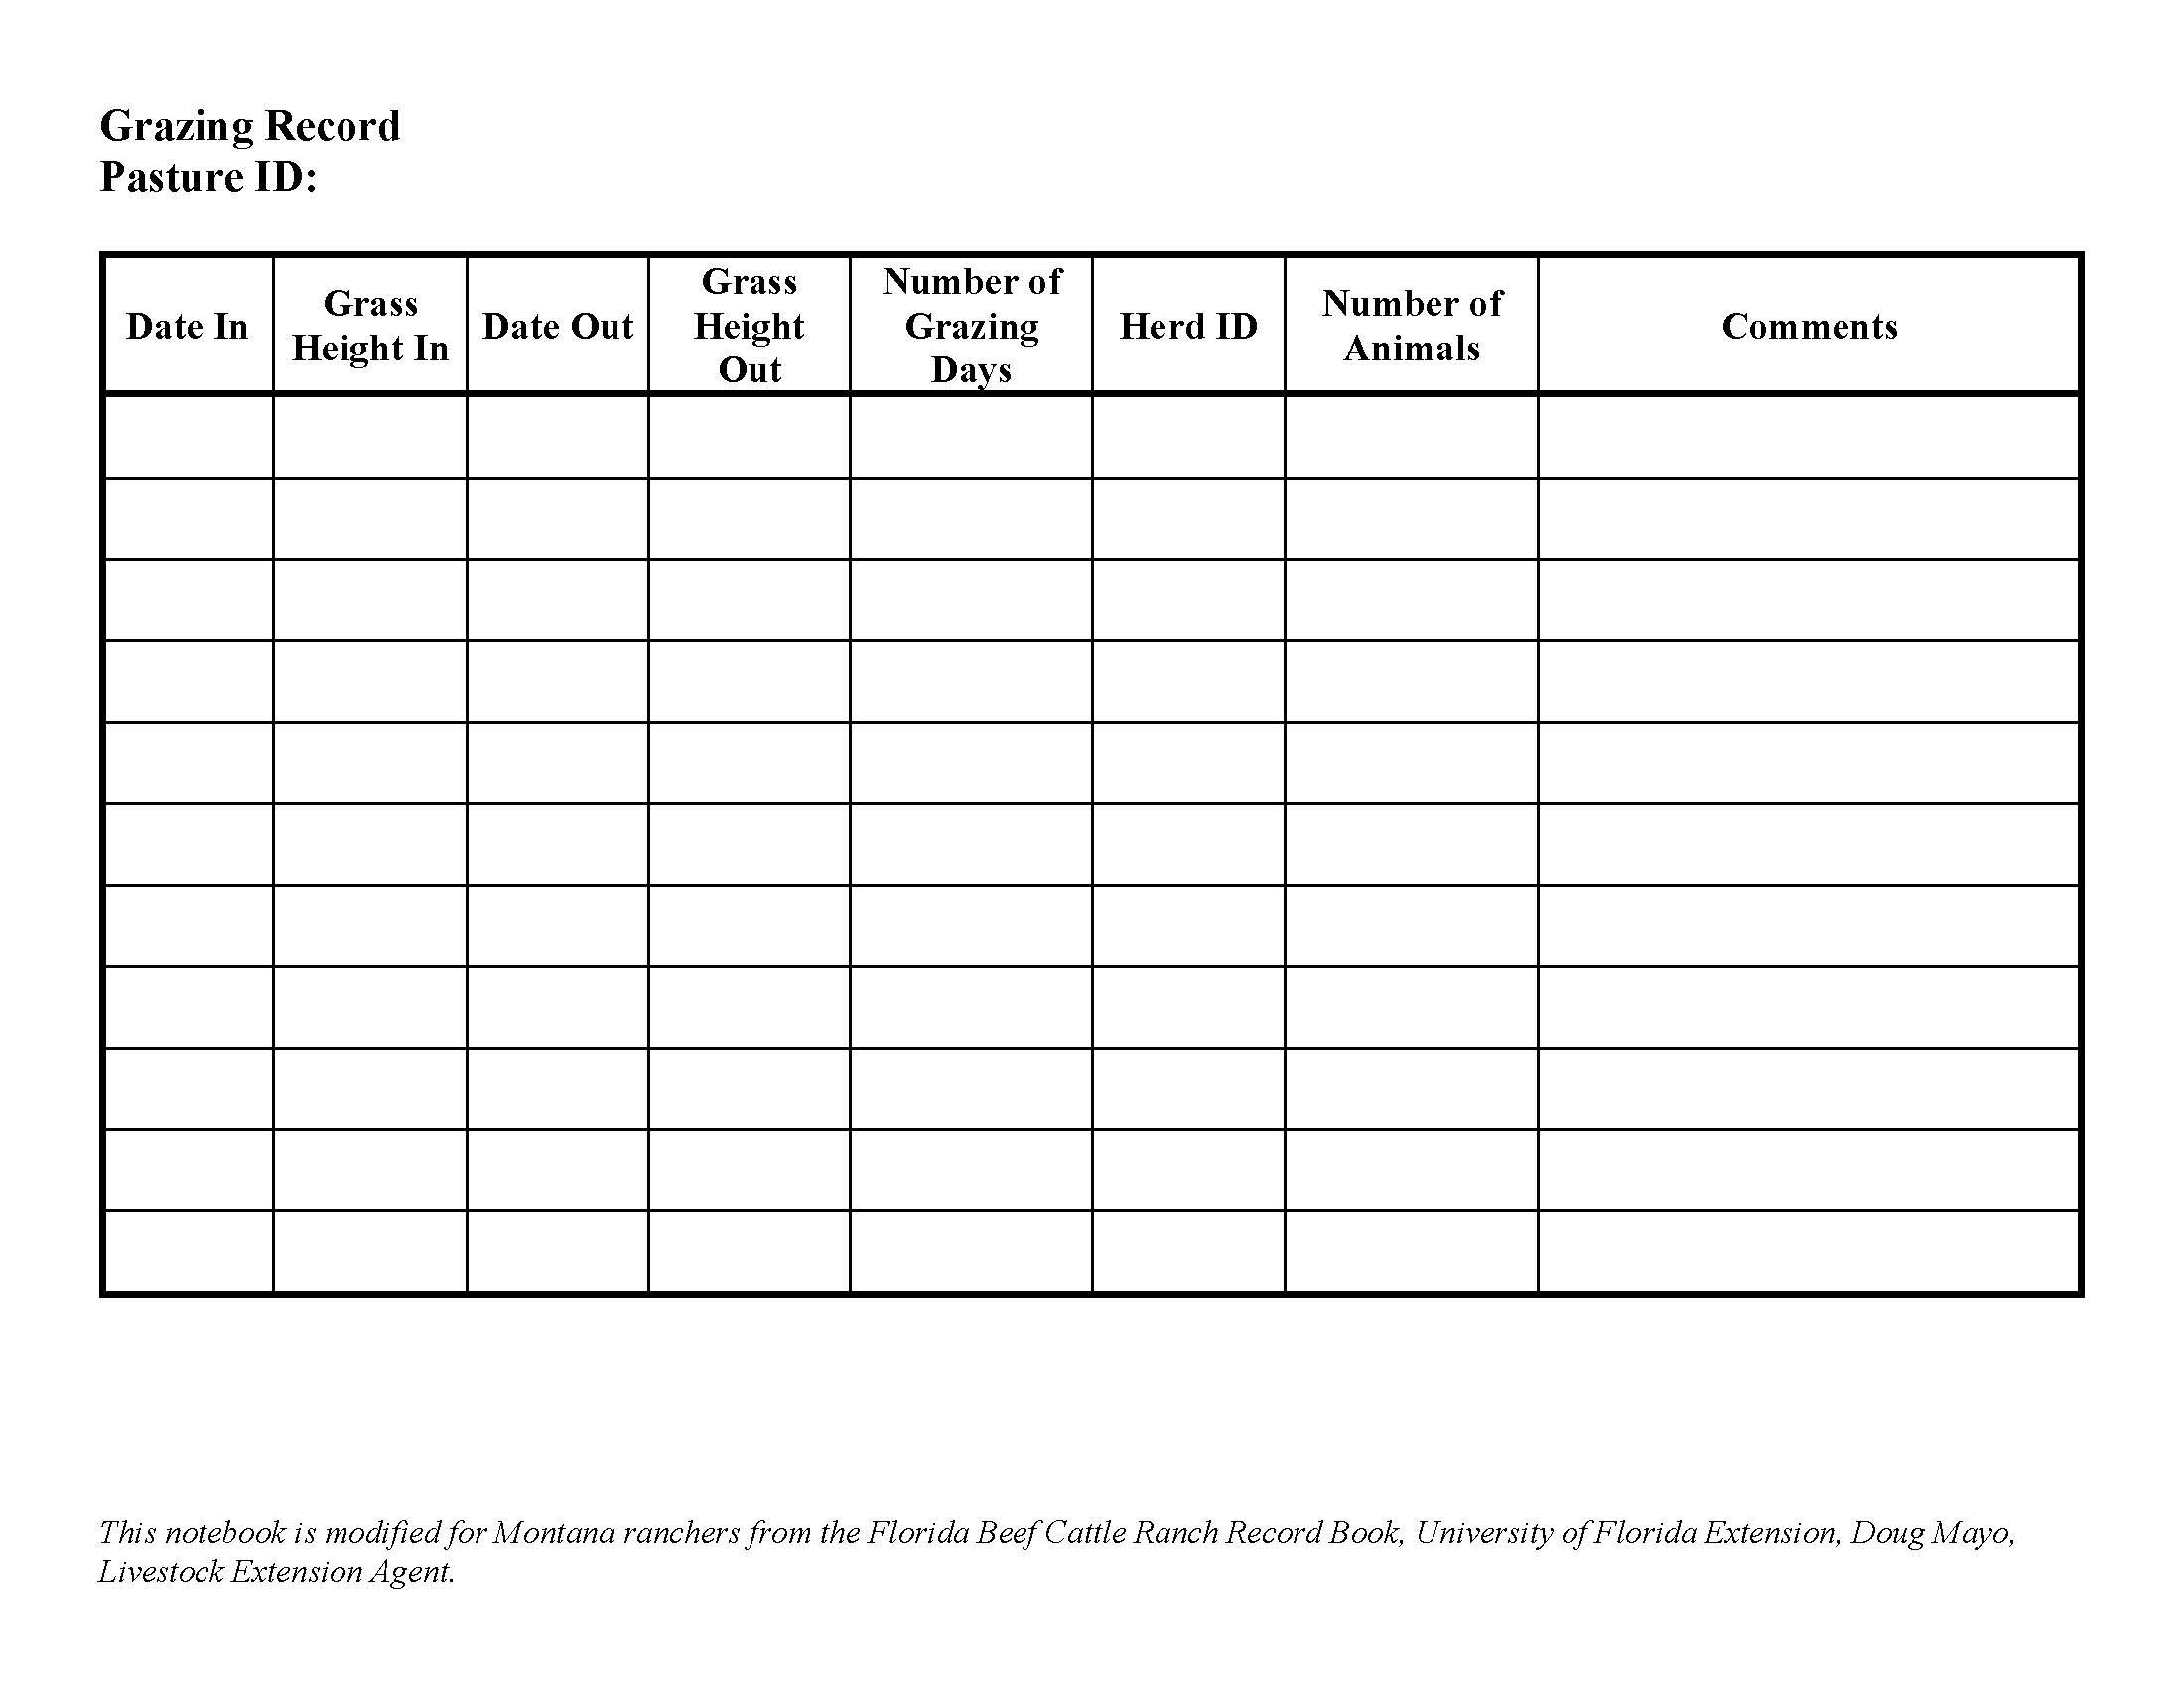 A sample table ussed to keep grazing records. To be included in the ranchers notebook.